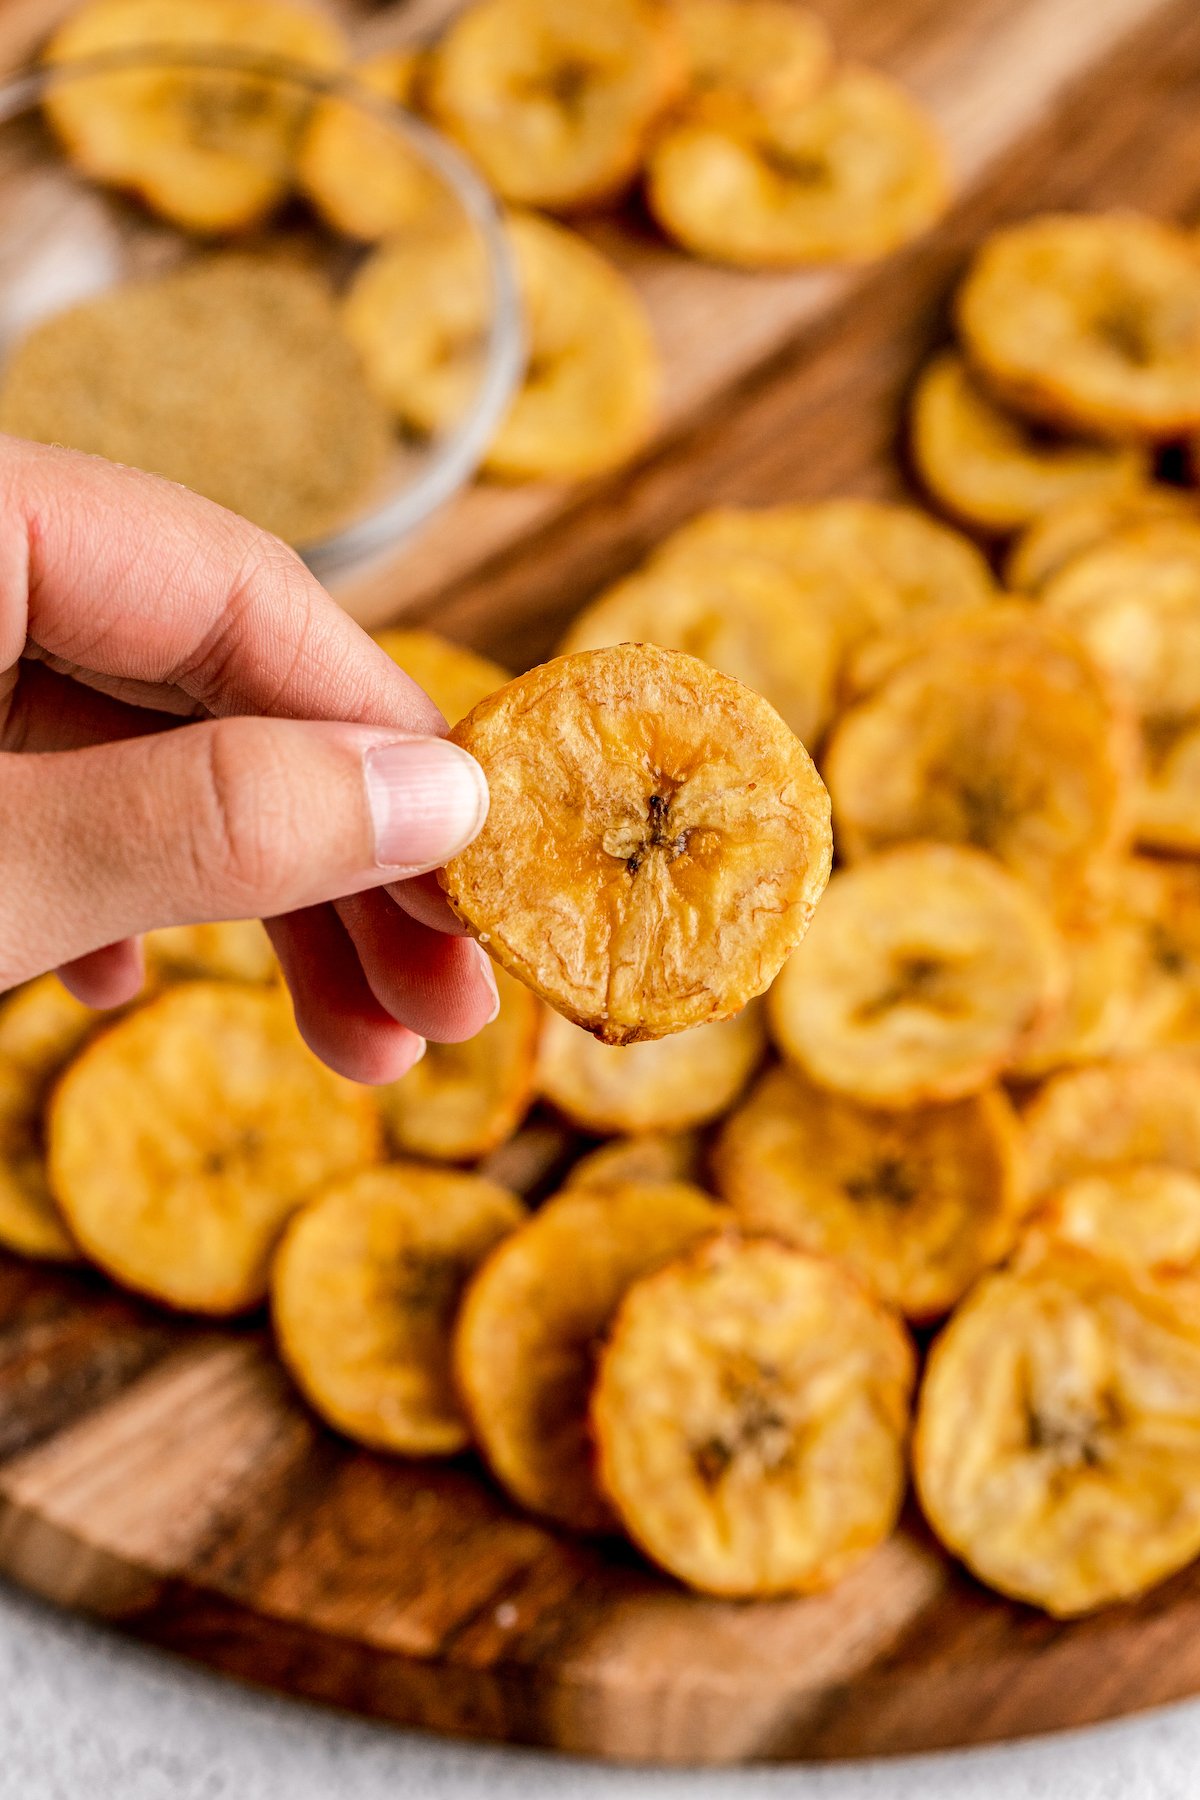 Baked plantain rounds, with one held up to the camera to show the size.